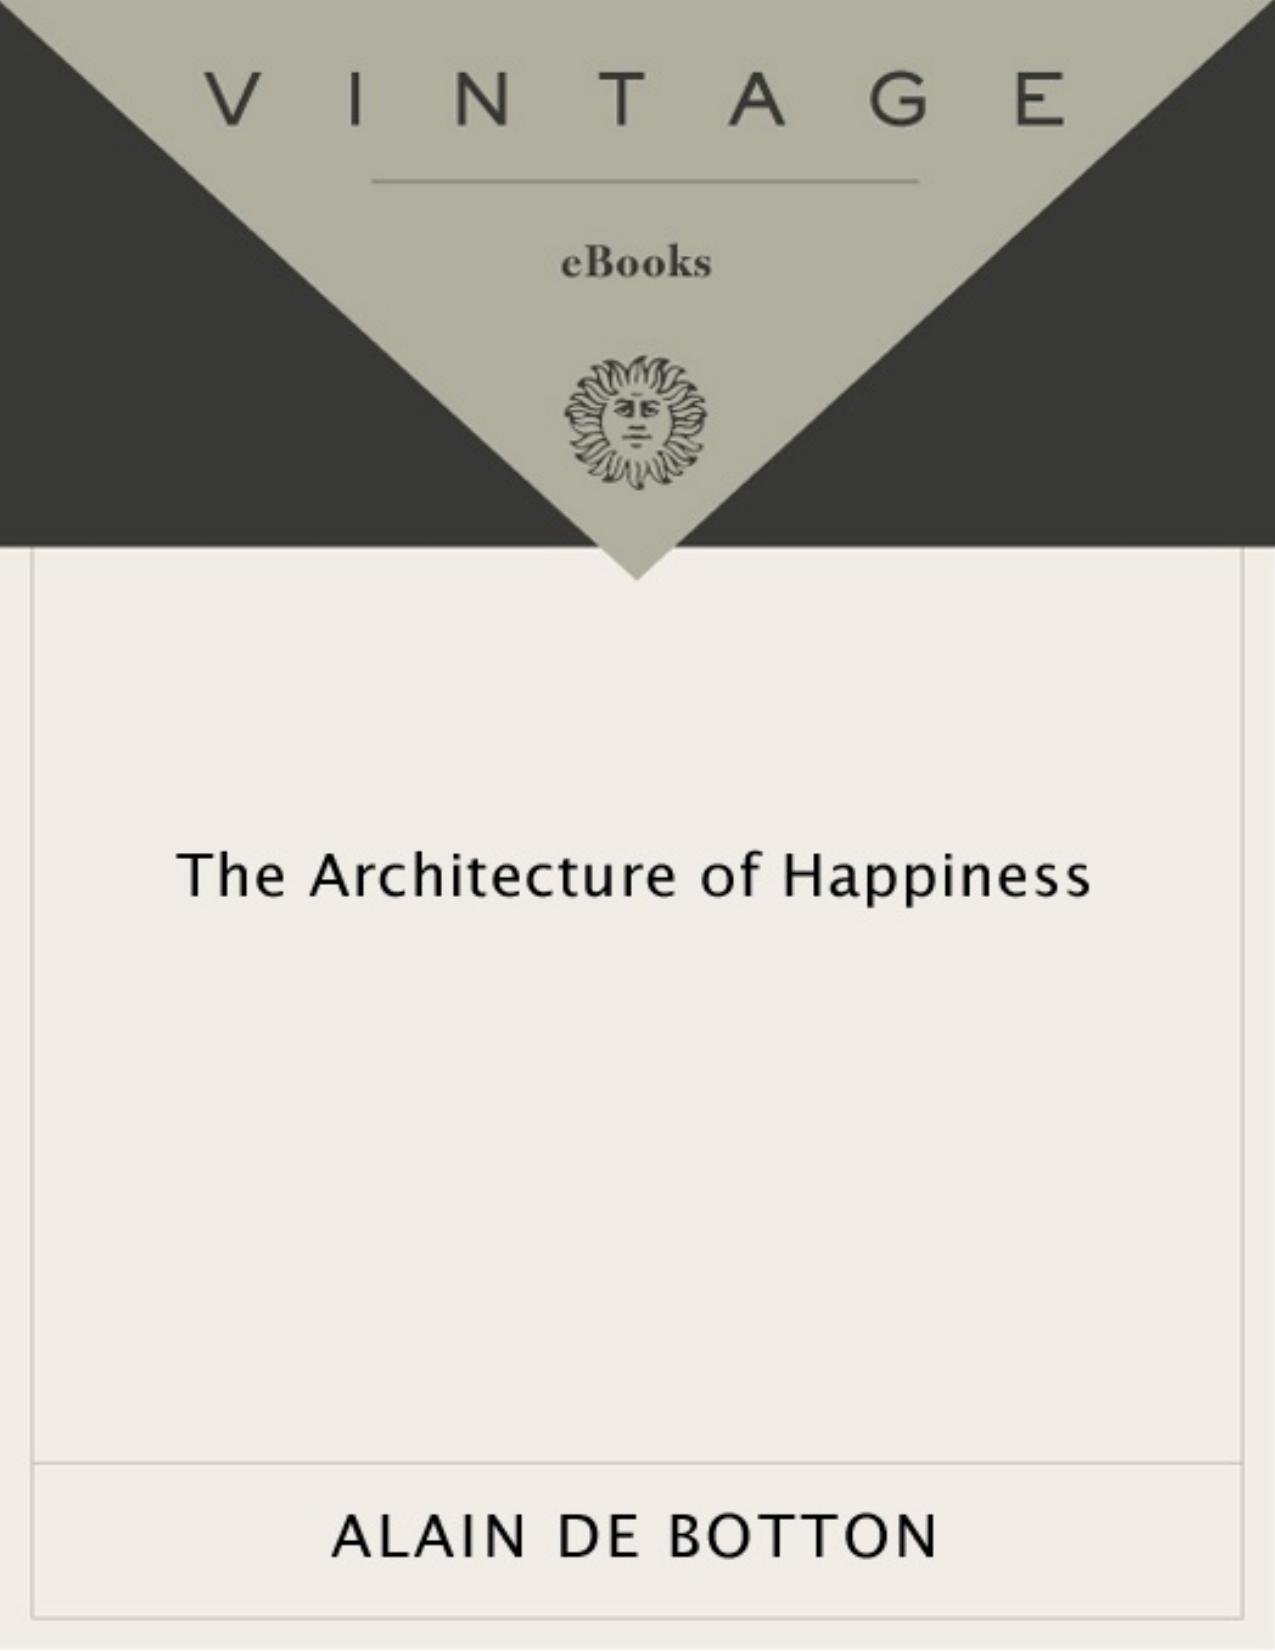 The Architecture of Happiness by Alain De Botton